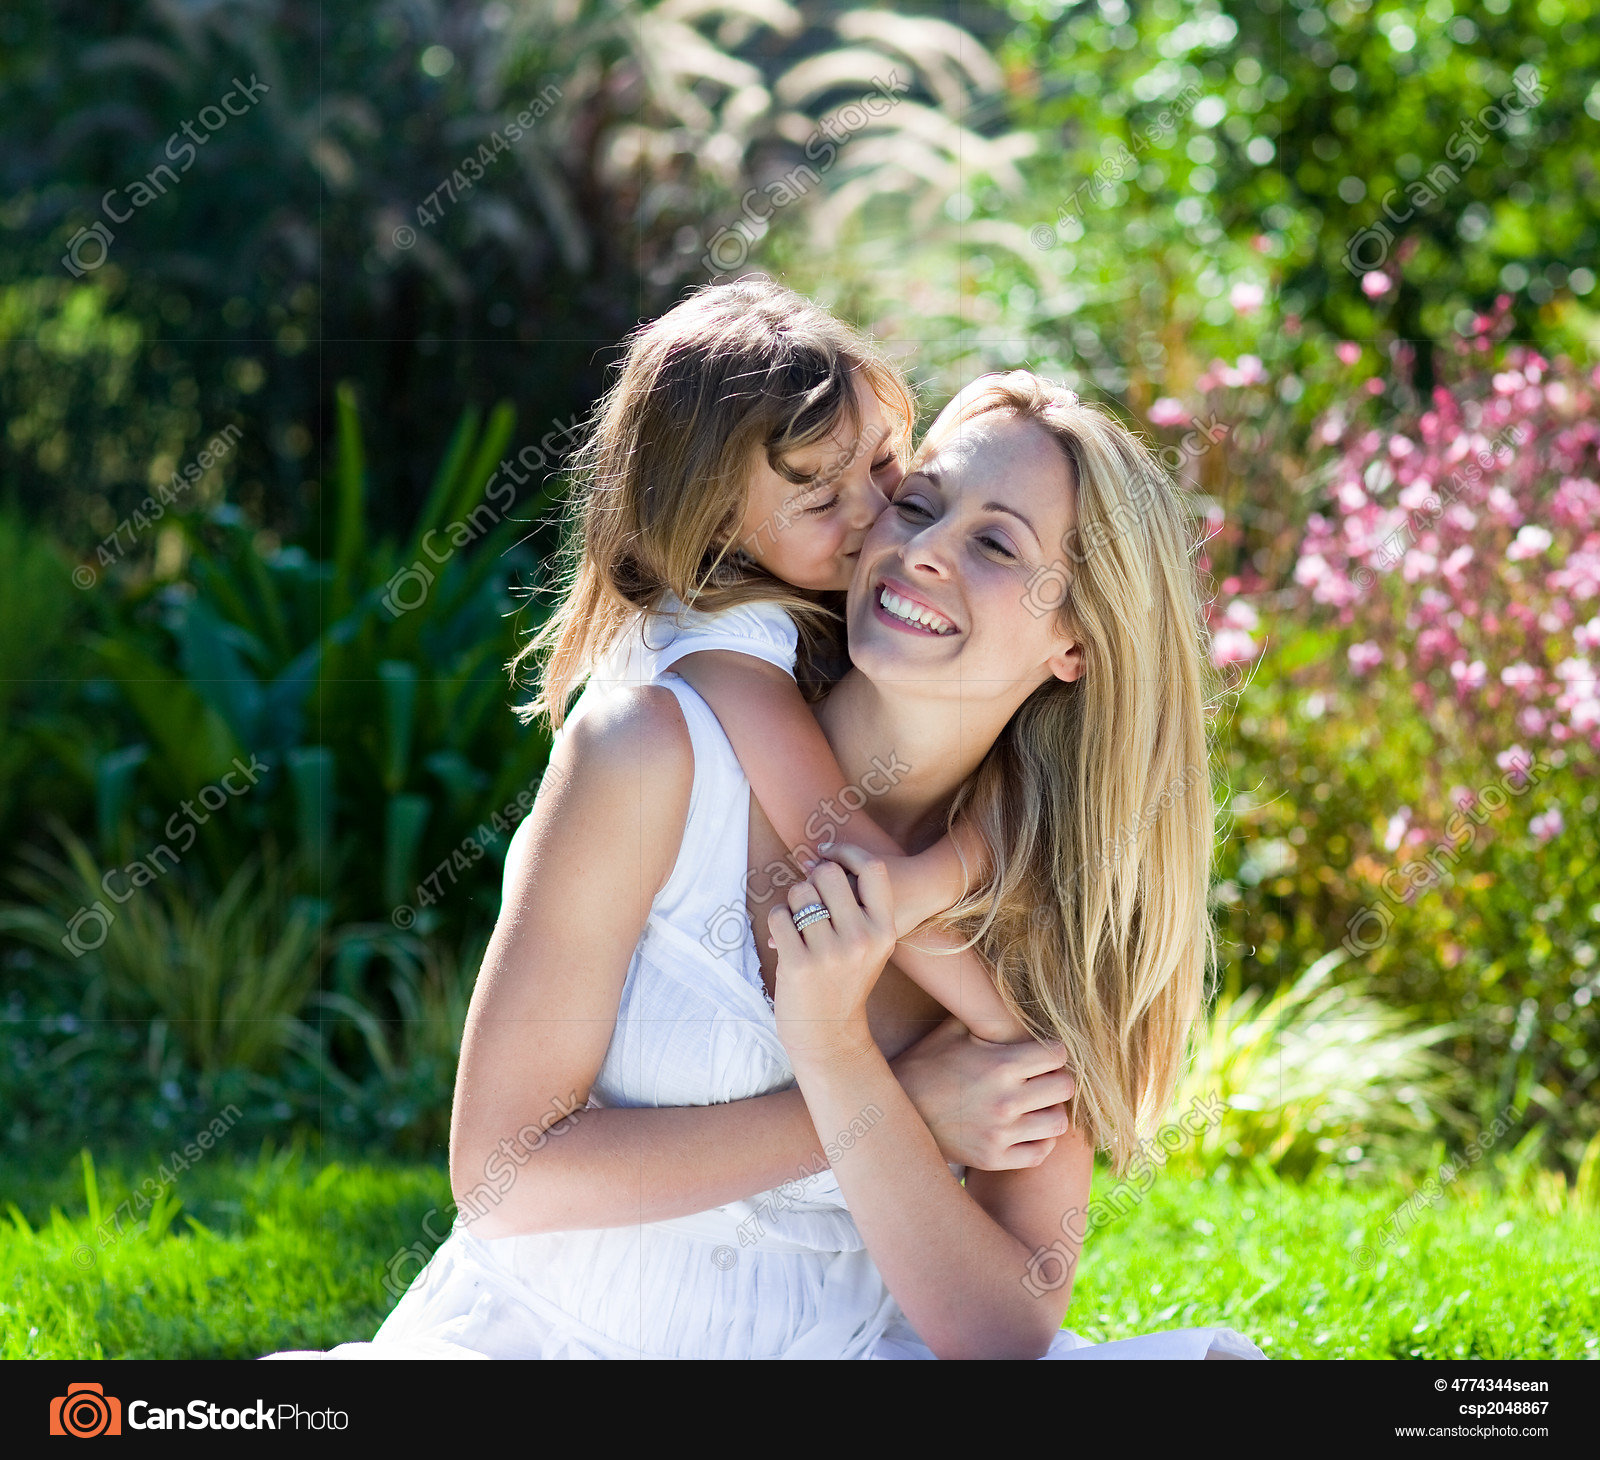 Little girl kissing her mother in a park picture - Search Photo ...